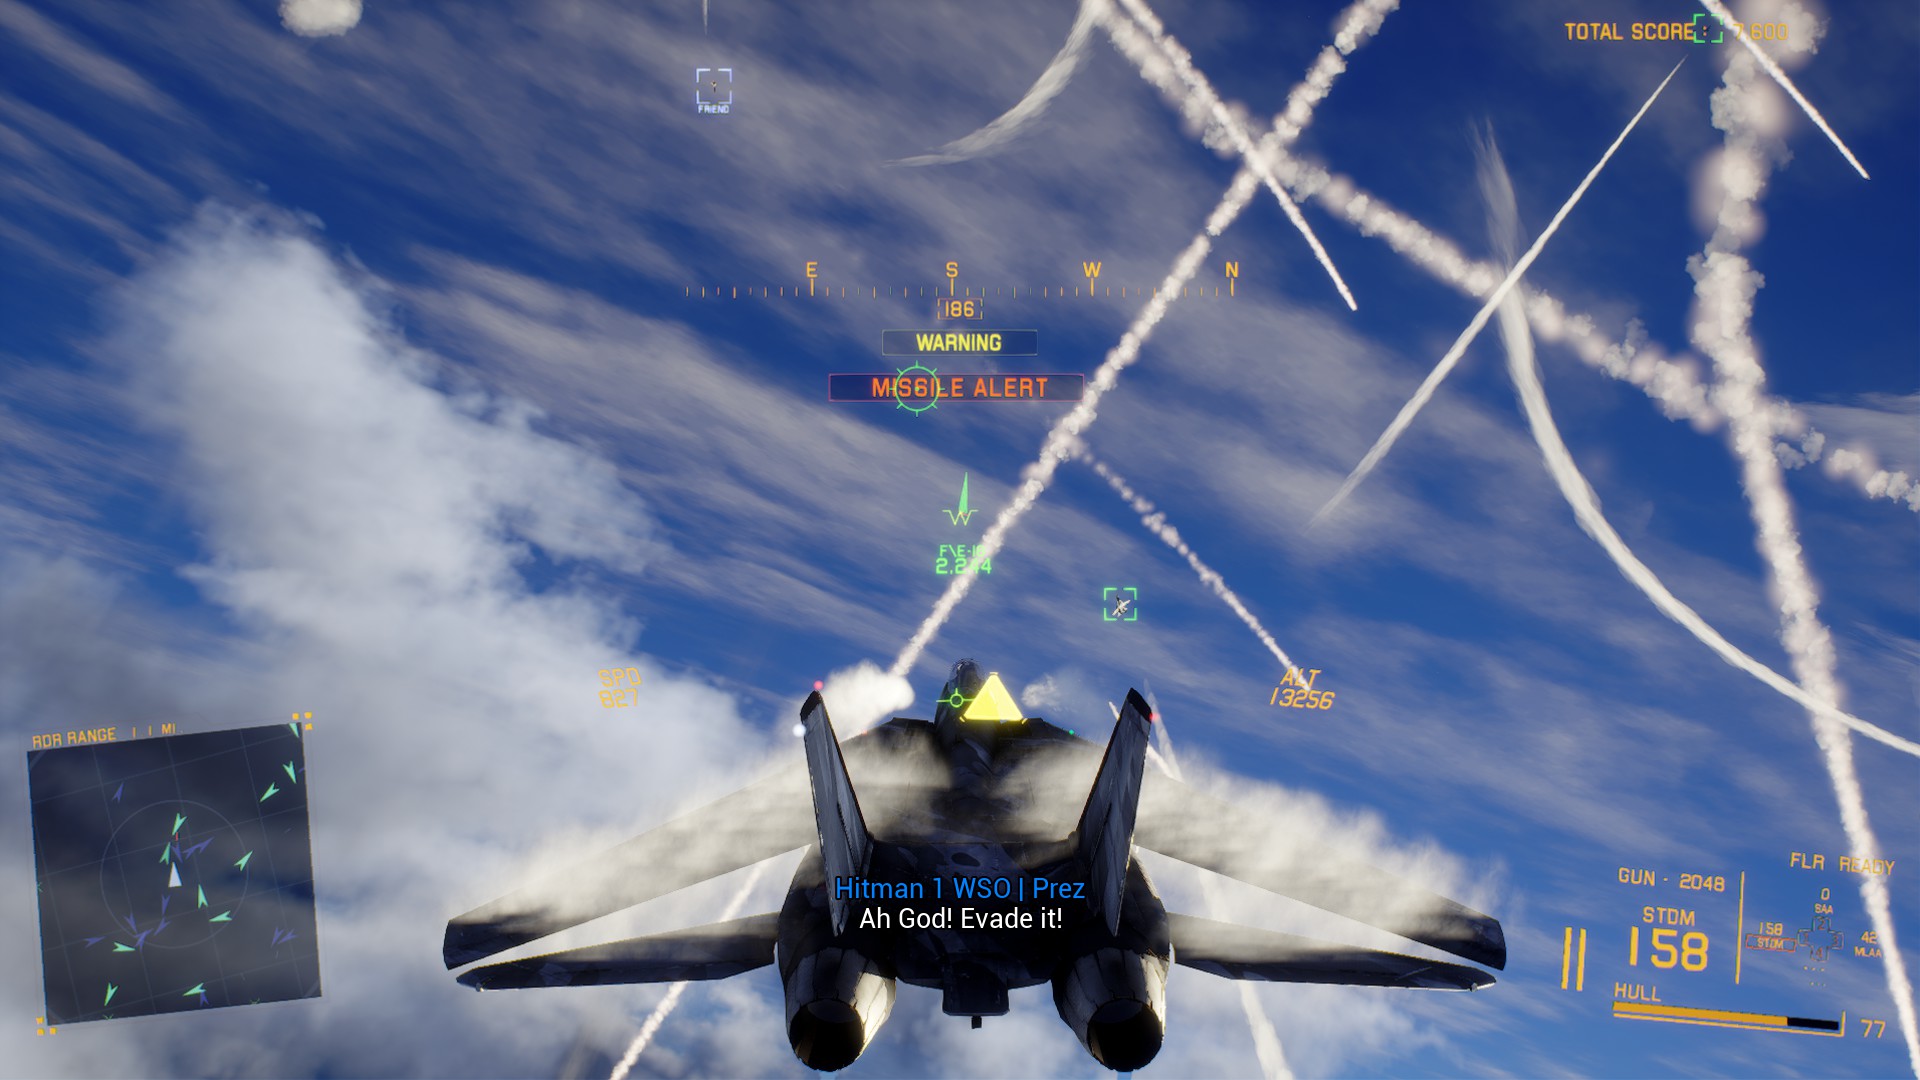 download free steam project wingman